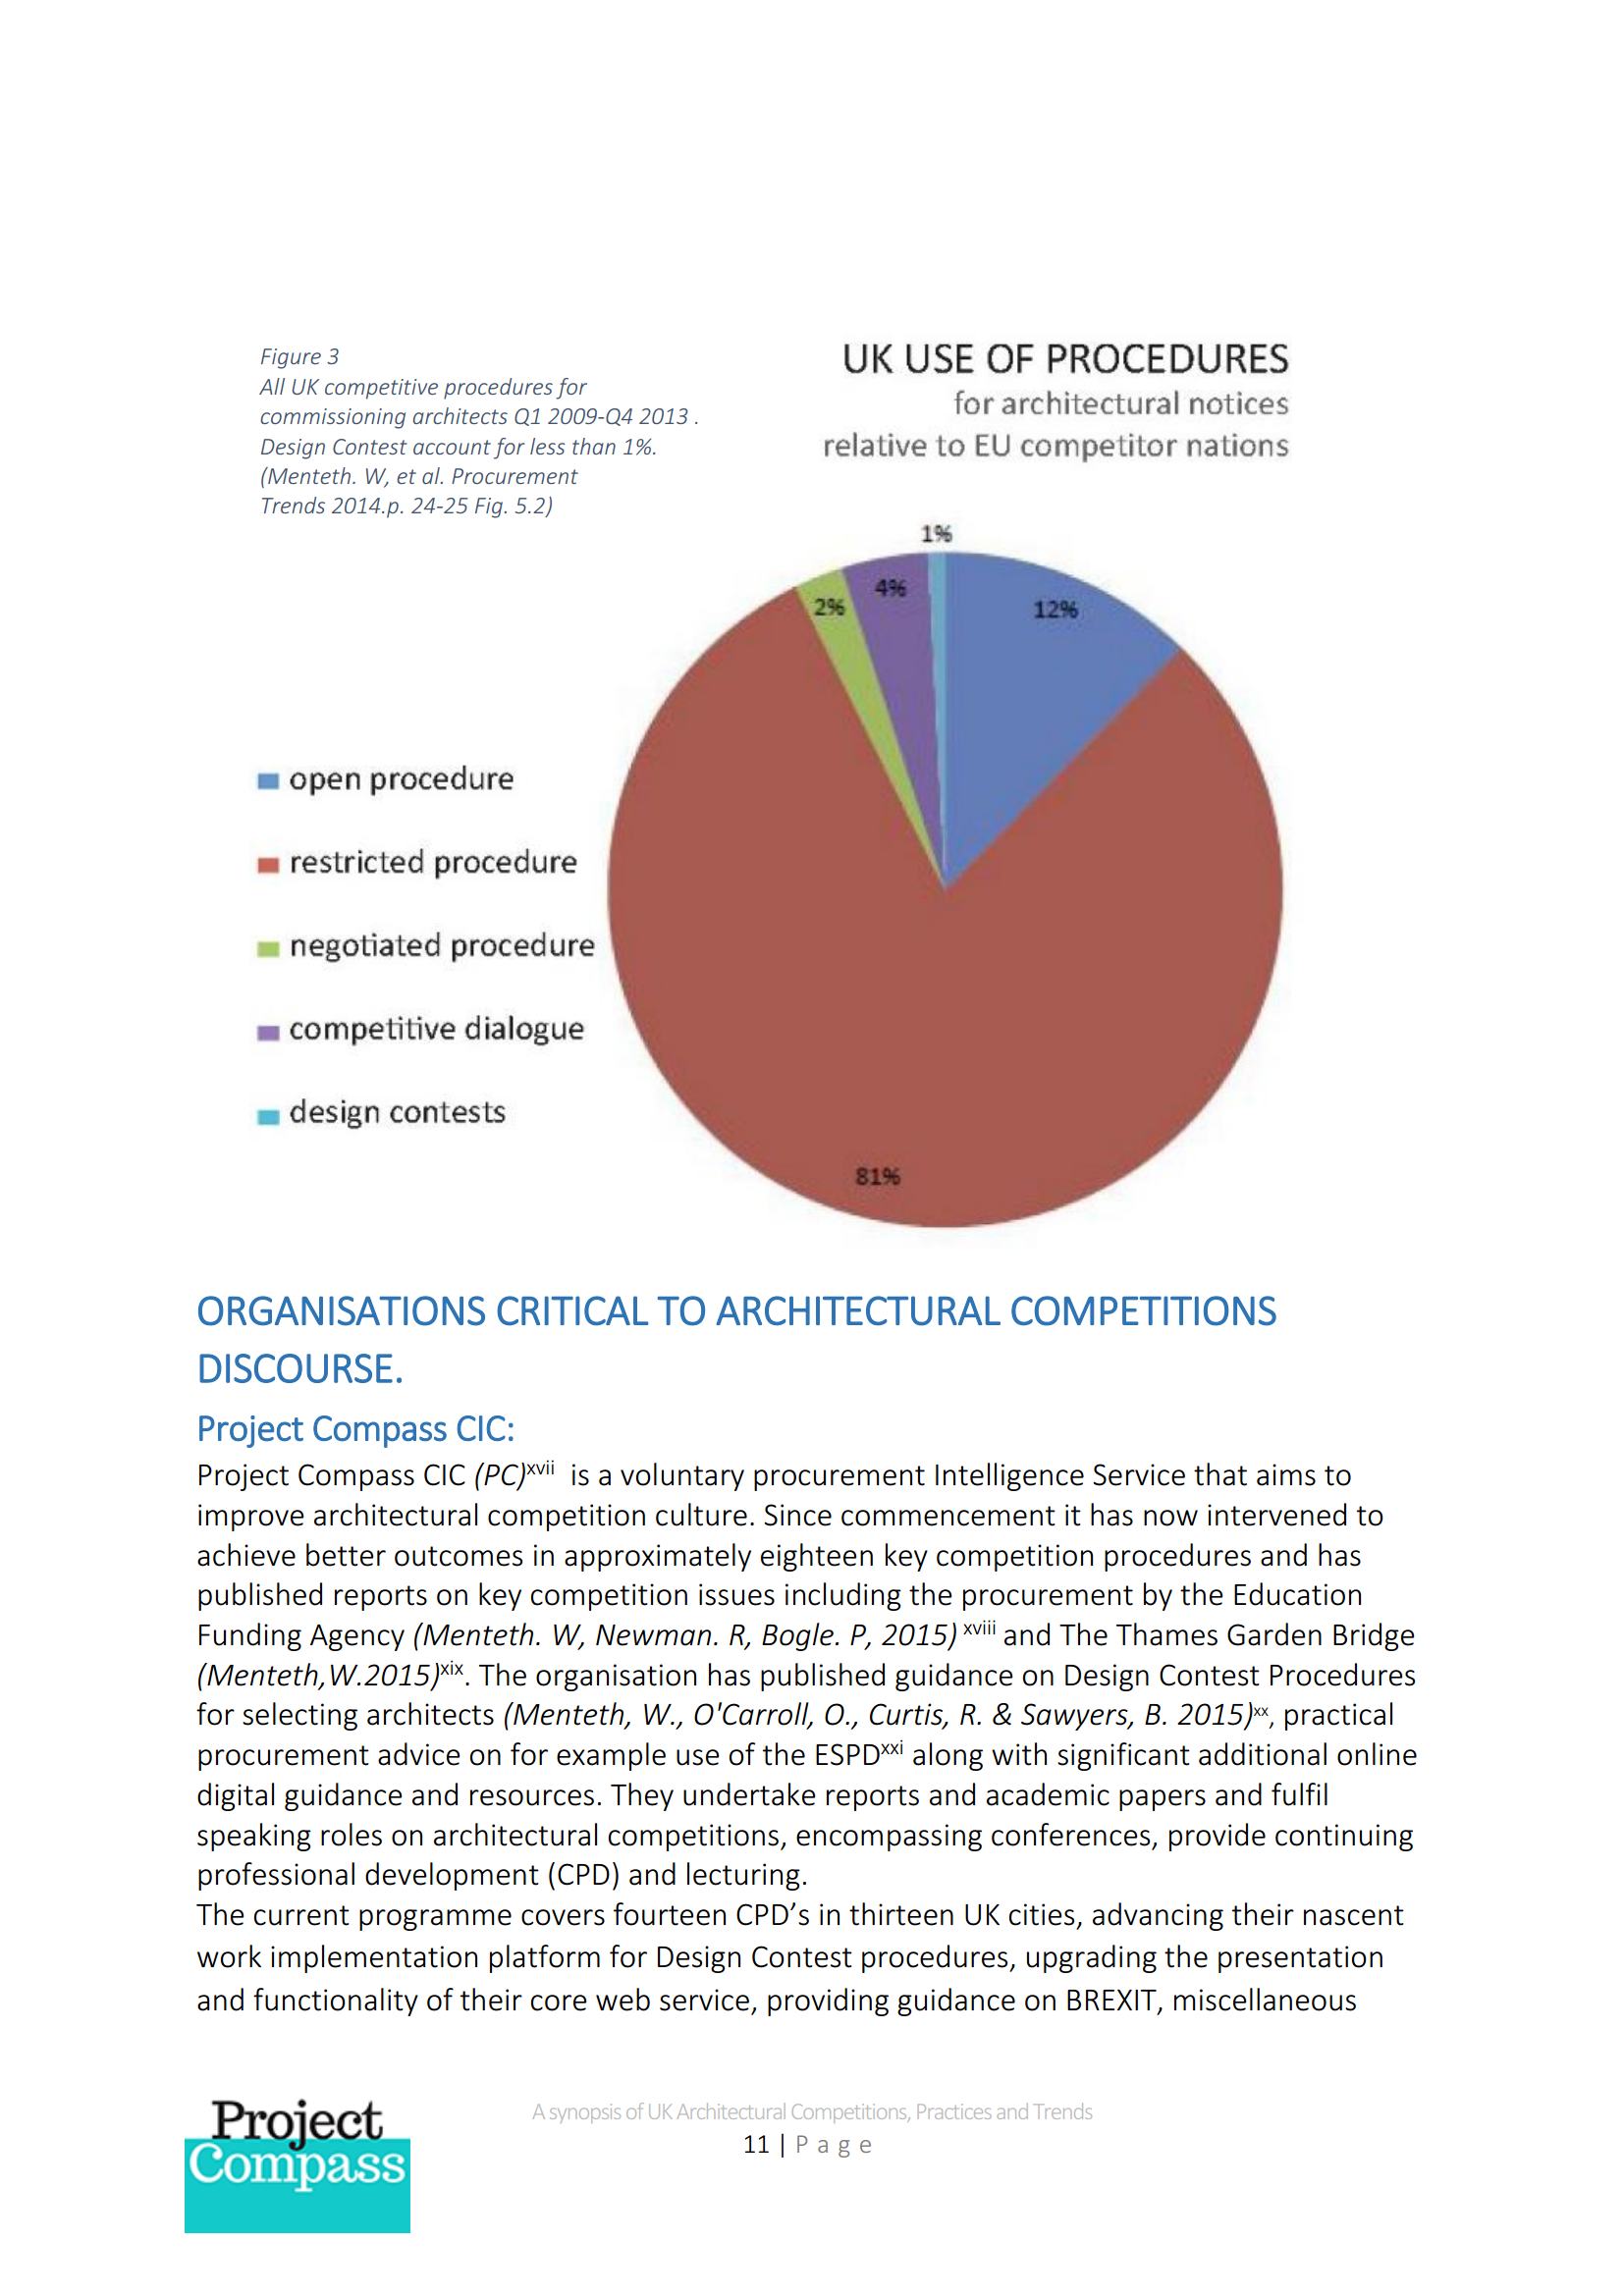 A synopsis of UK Architectural Competitions Practices and Trends. March 2017 / by Walter Menteth ; A Project Compass CIC report (R2) Commissioned by Architectuur Lokaal. — Project Compass CIC, 2017